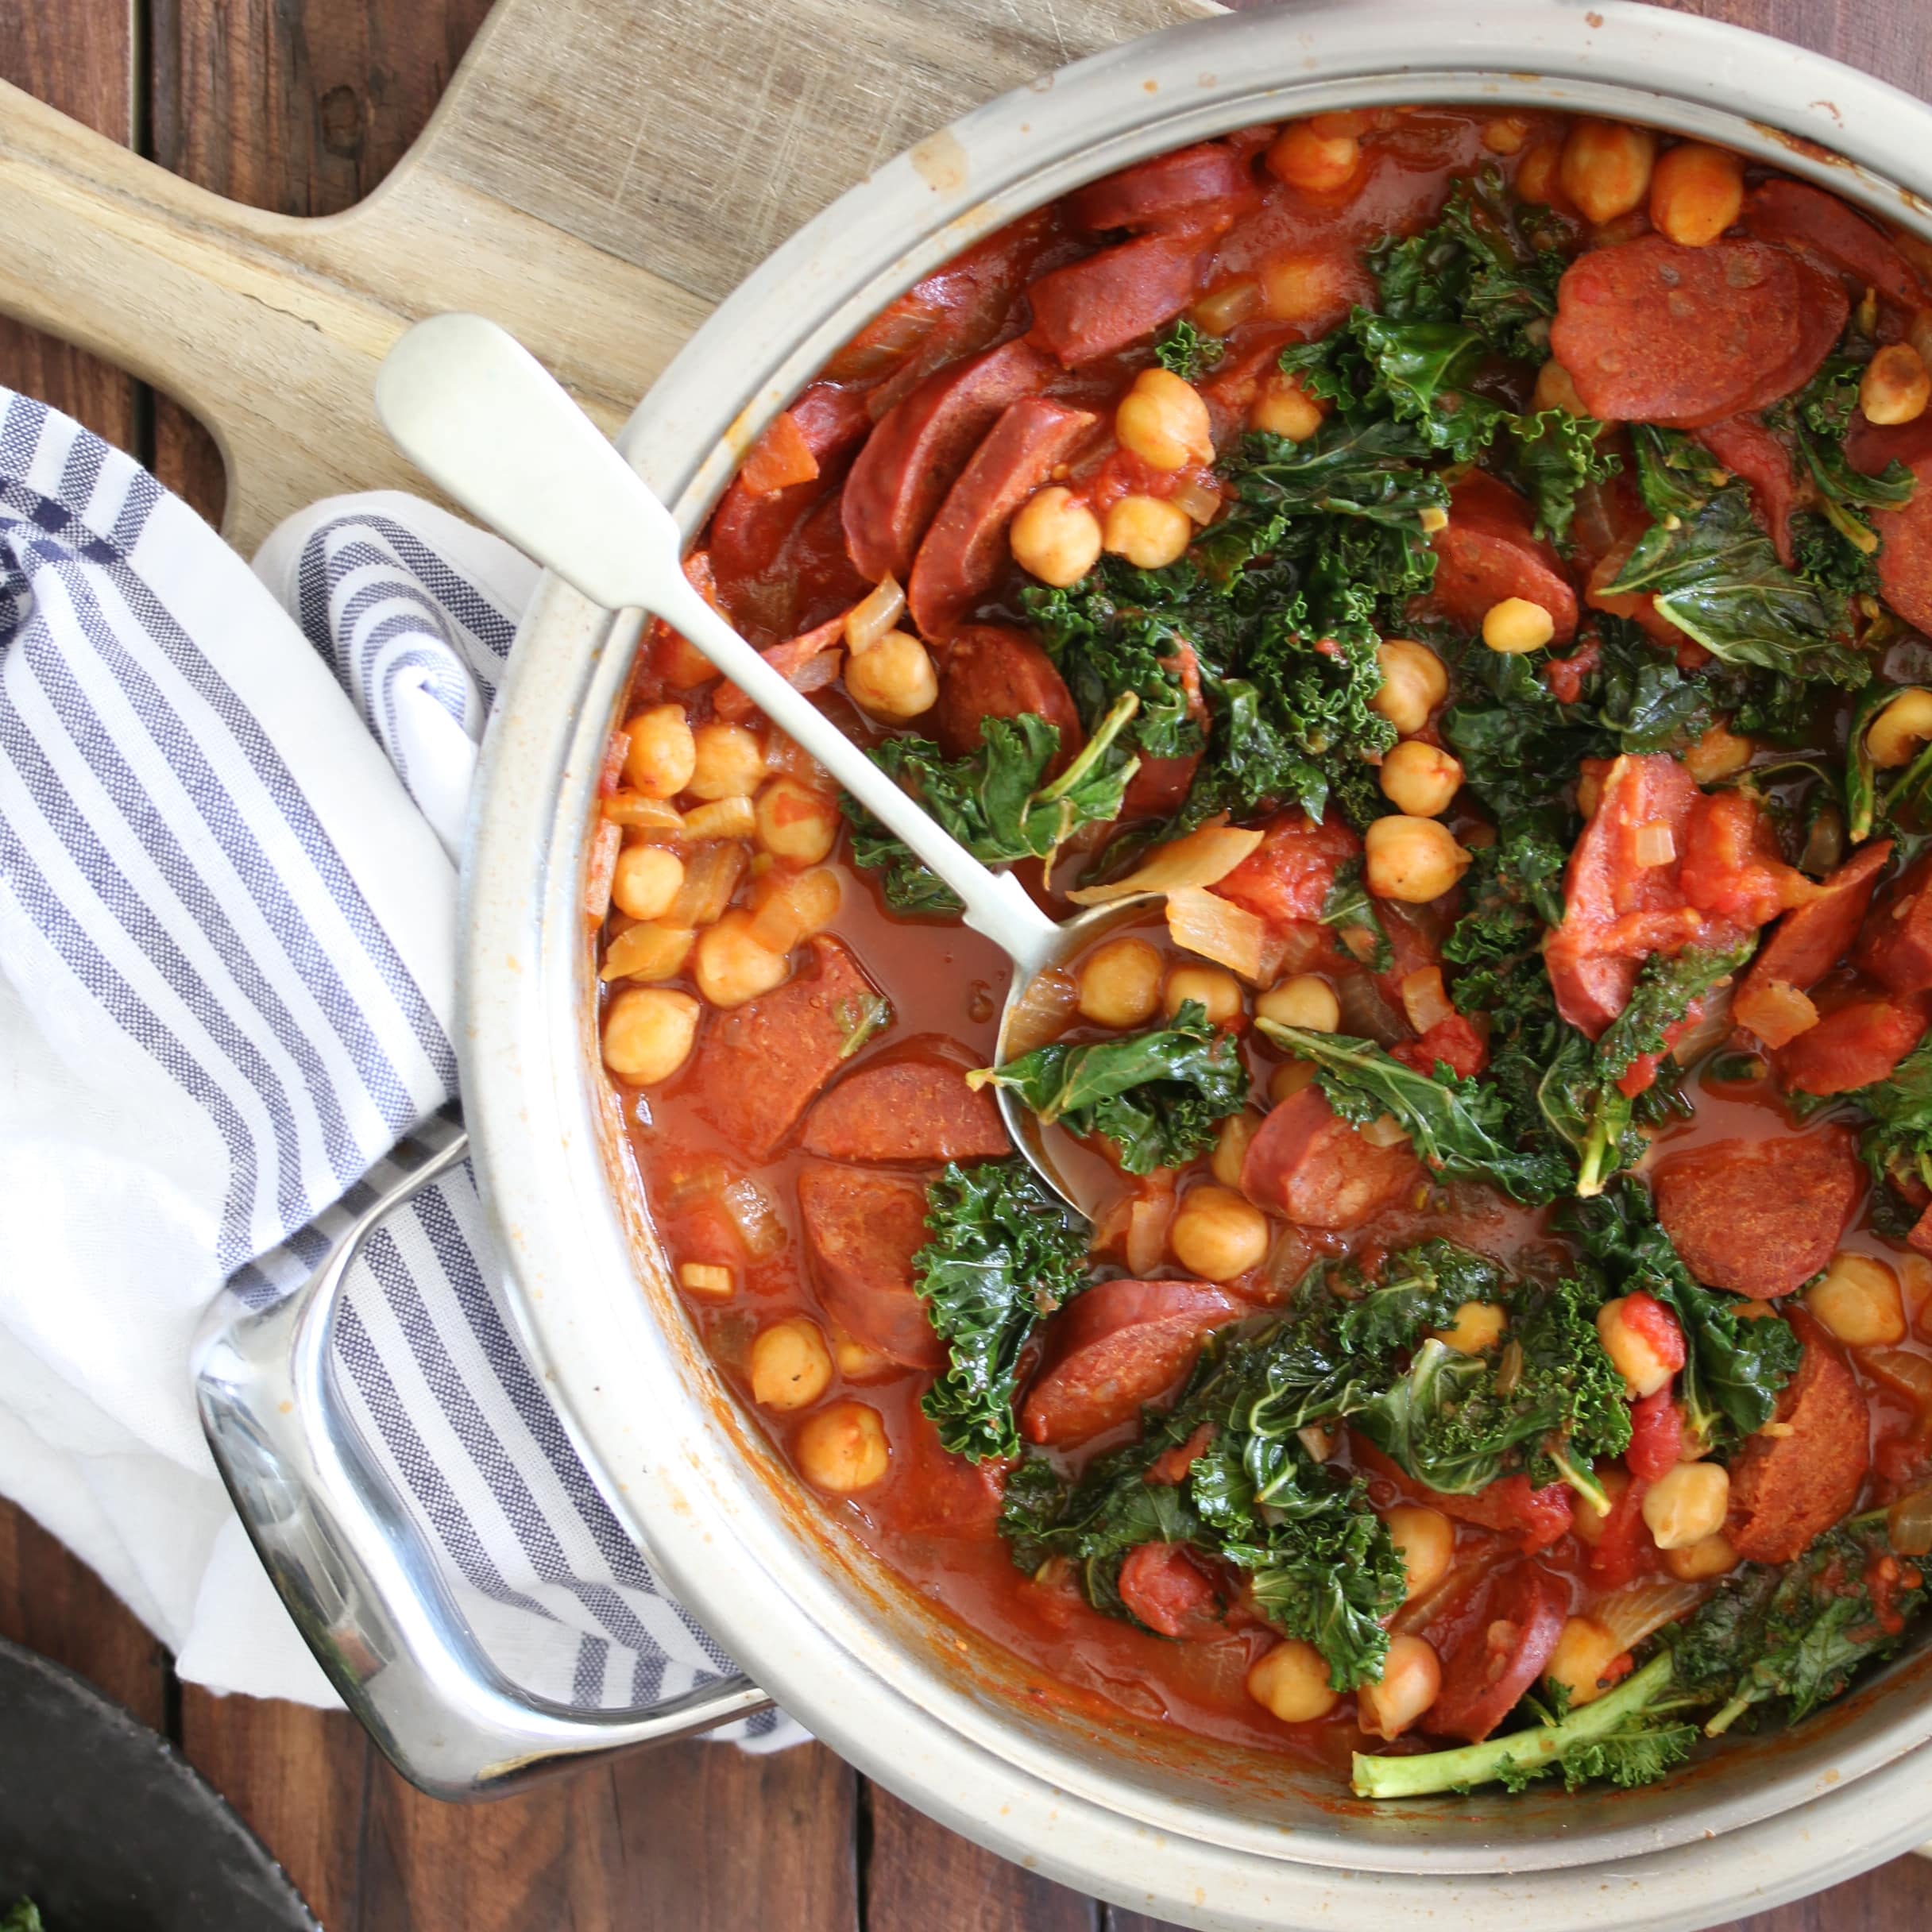 Chorizo, chickpeas & kale in a spicy tomato sauce